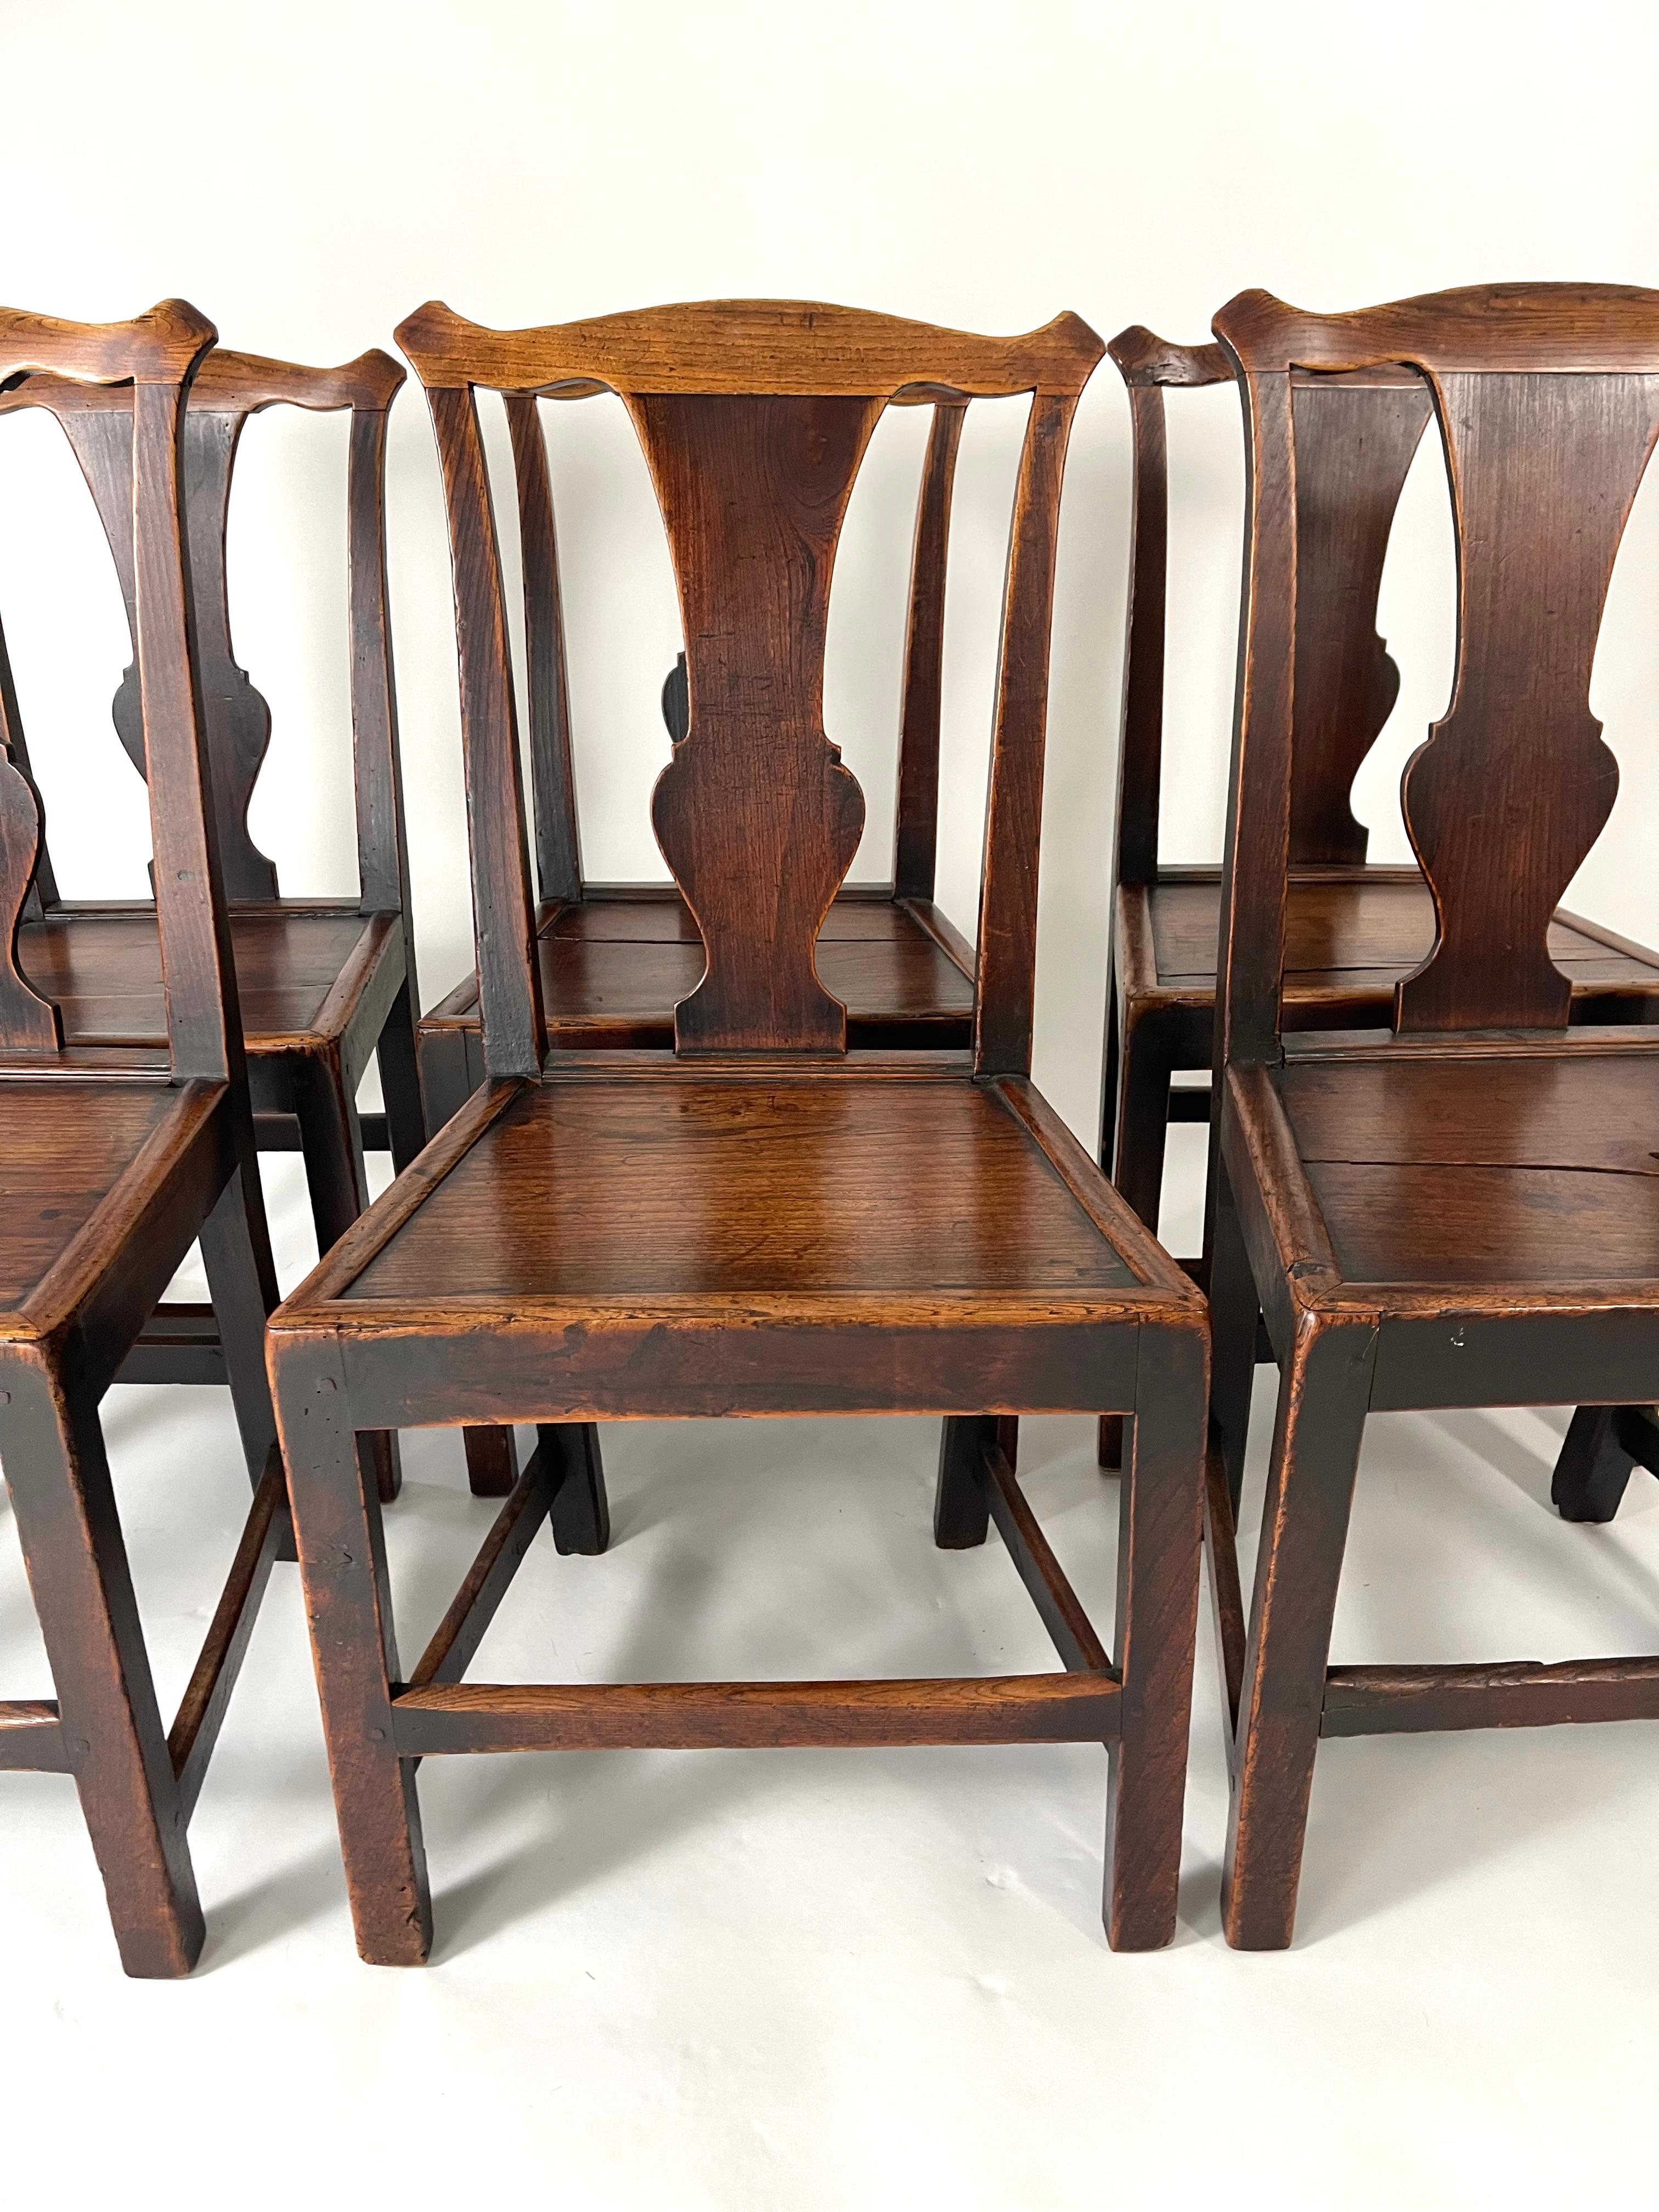 A set of six 18th century Chippendale English Provincial dining chairs in elm and oak. Bold, simplified form with wonderful patina and character, the shaped crest rail above vasiform back splats and solid plank seats supported by square section legs